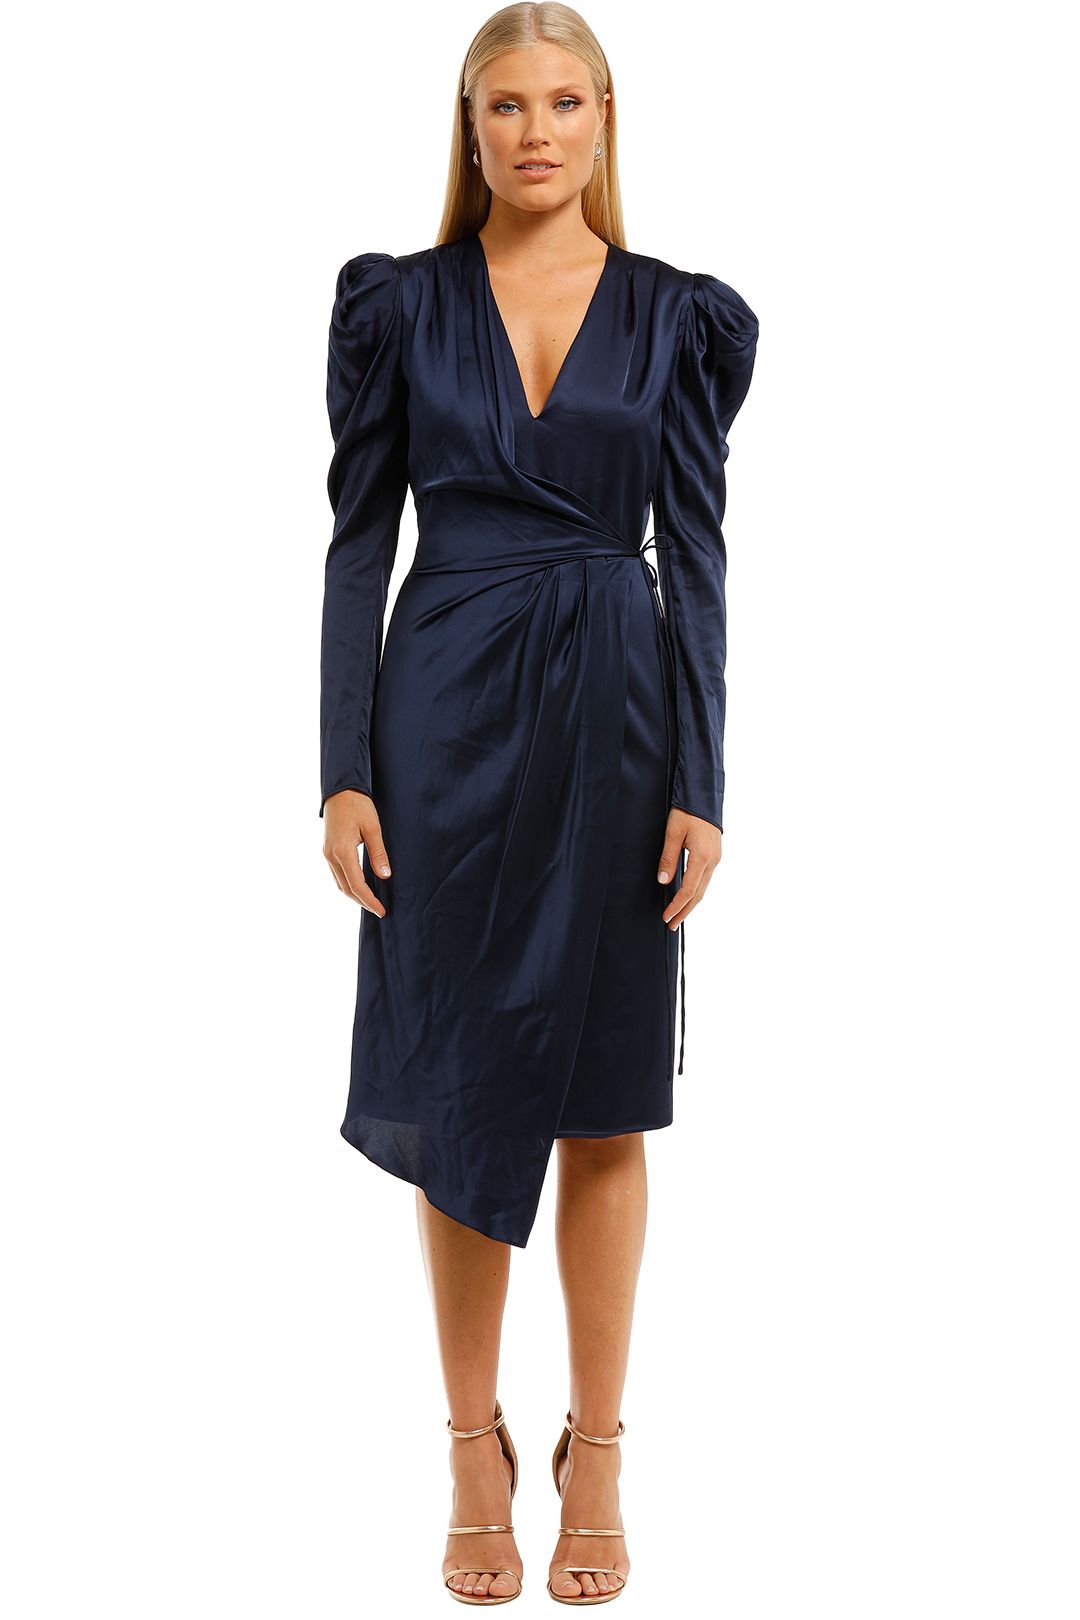 Manning-Cartell-Style-Code-Drape-Dress-Navy-Front